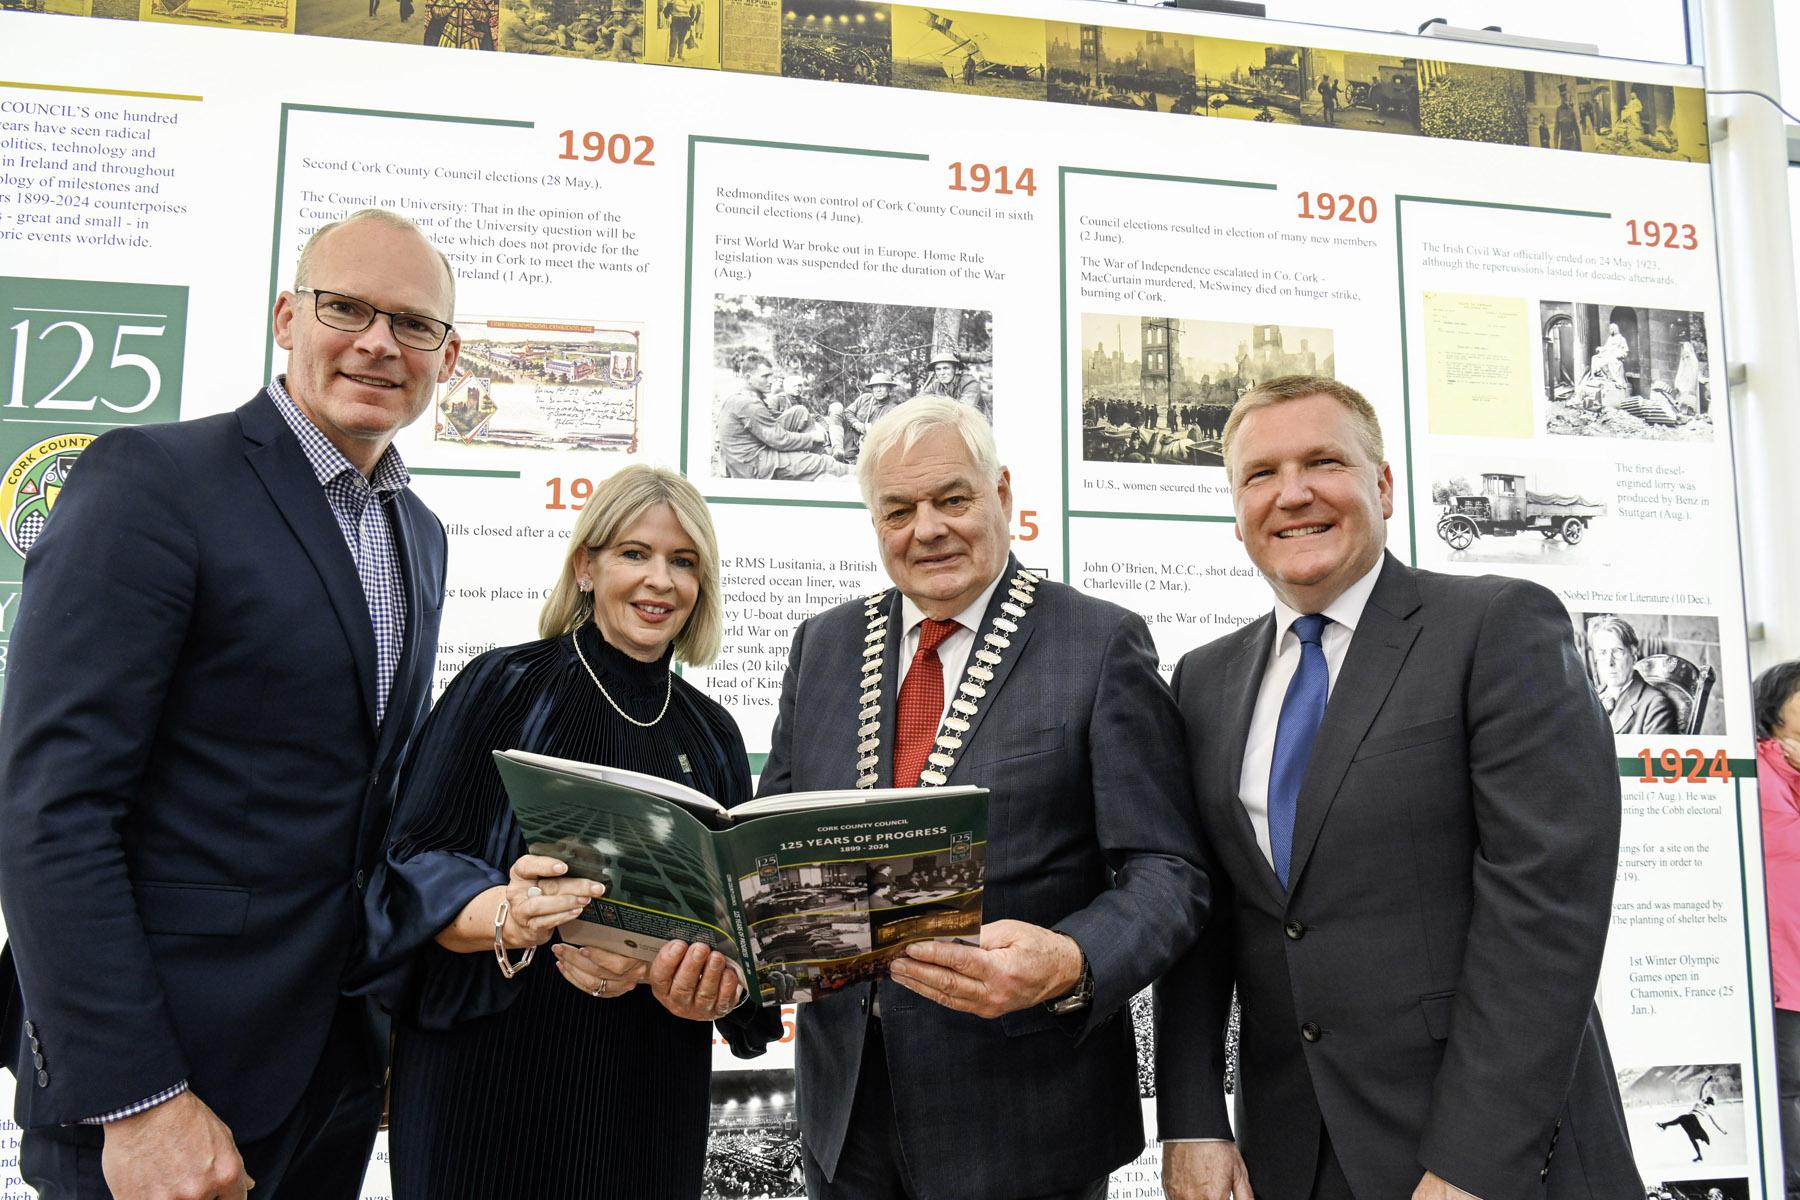 Deputy Simon Coveney TD; Valerie O'Sullivan, Chief Executive, Cork County Council; Cllr. Frank O'Flynn, Mayor of the County of Cork and Michael McGrath, Minister for Finance at the Cork County COuncil 125th Anniversary commemorative event.